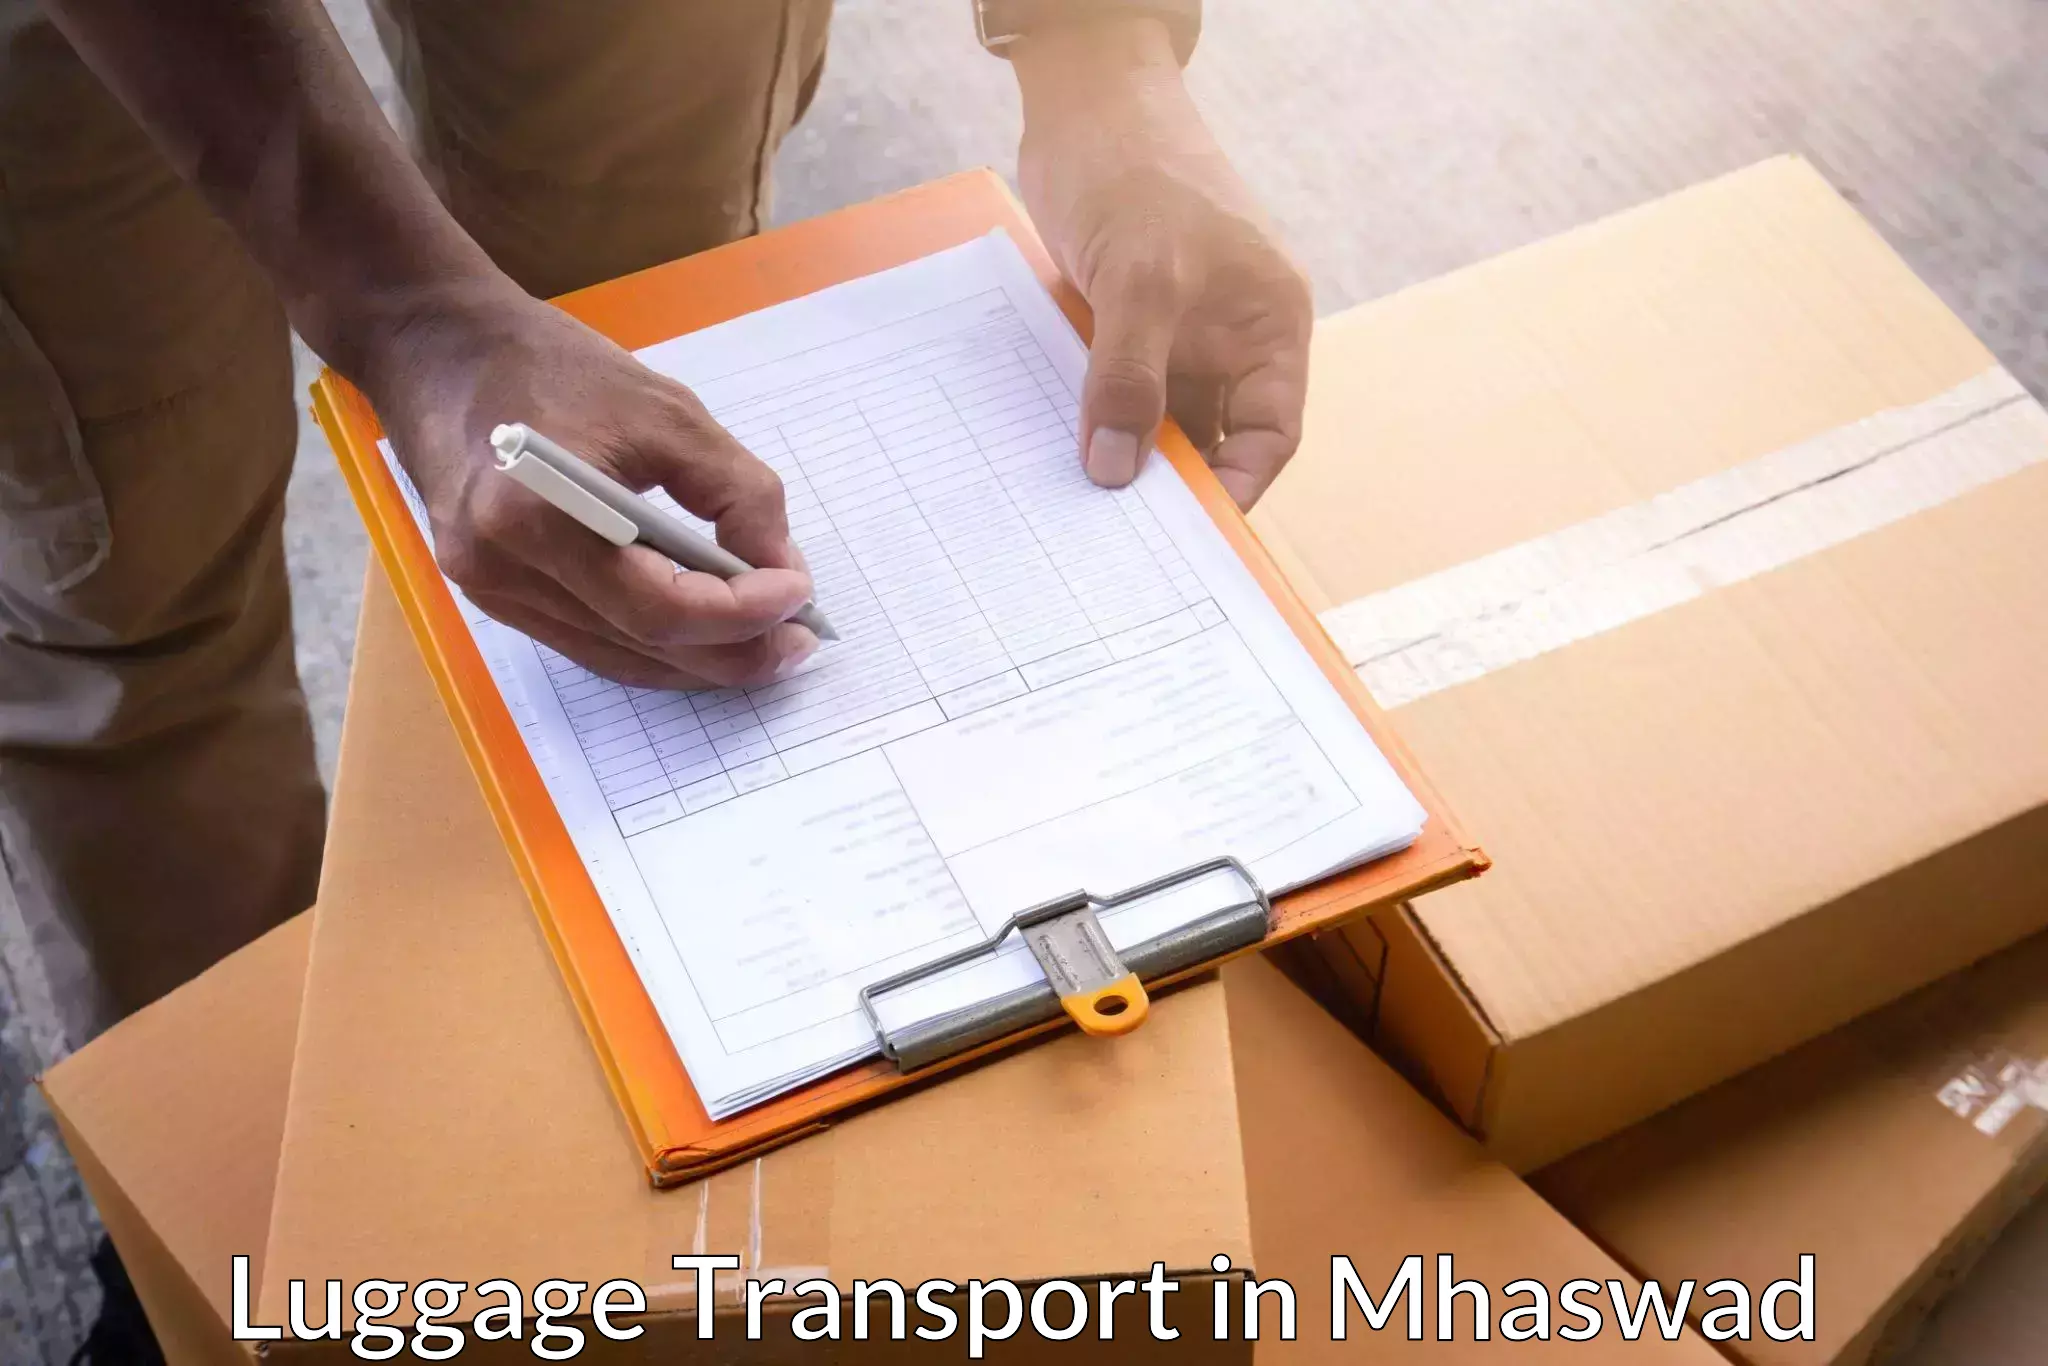 Luggage delivery system in Mhaswad